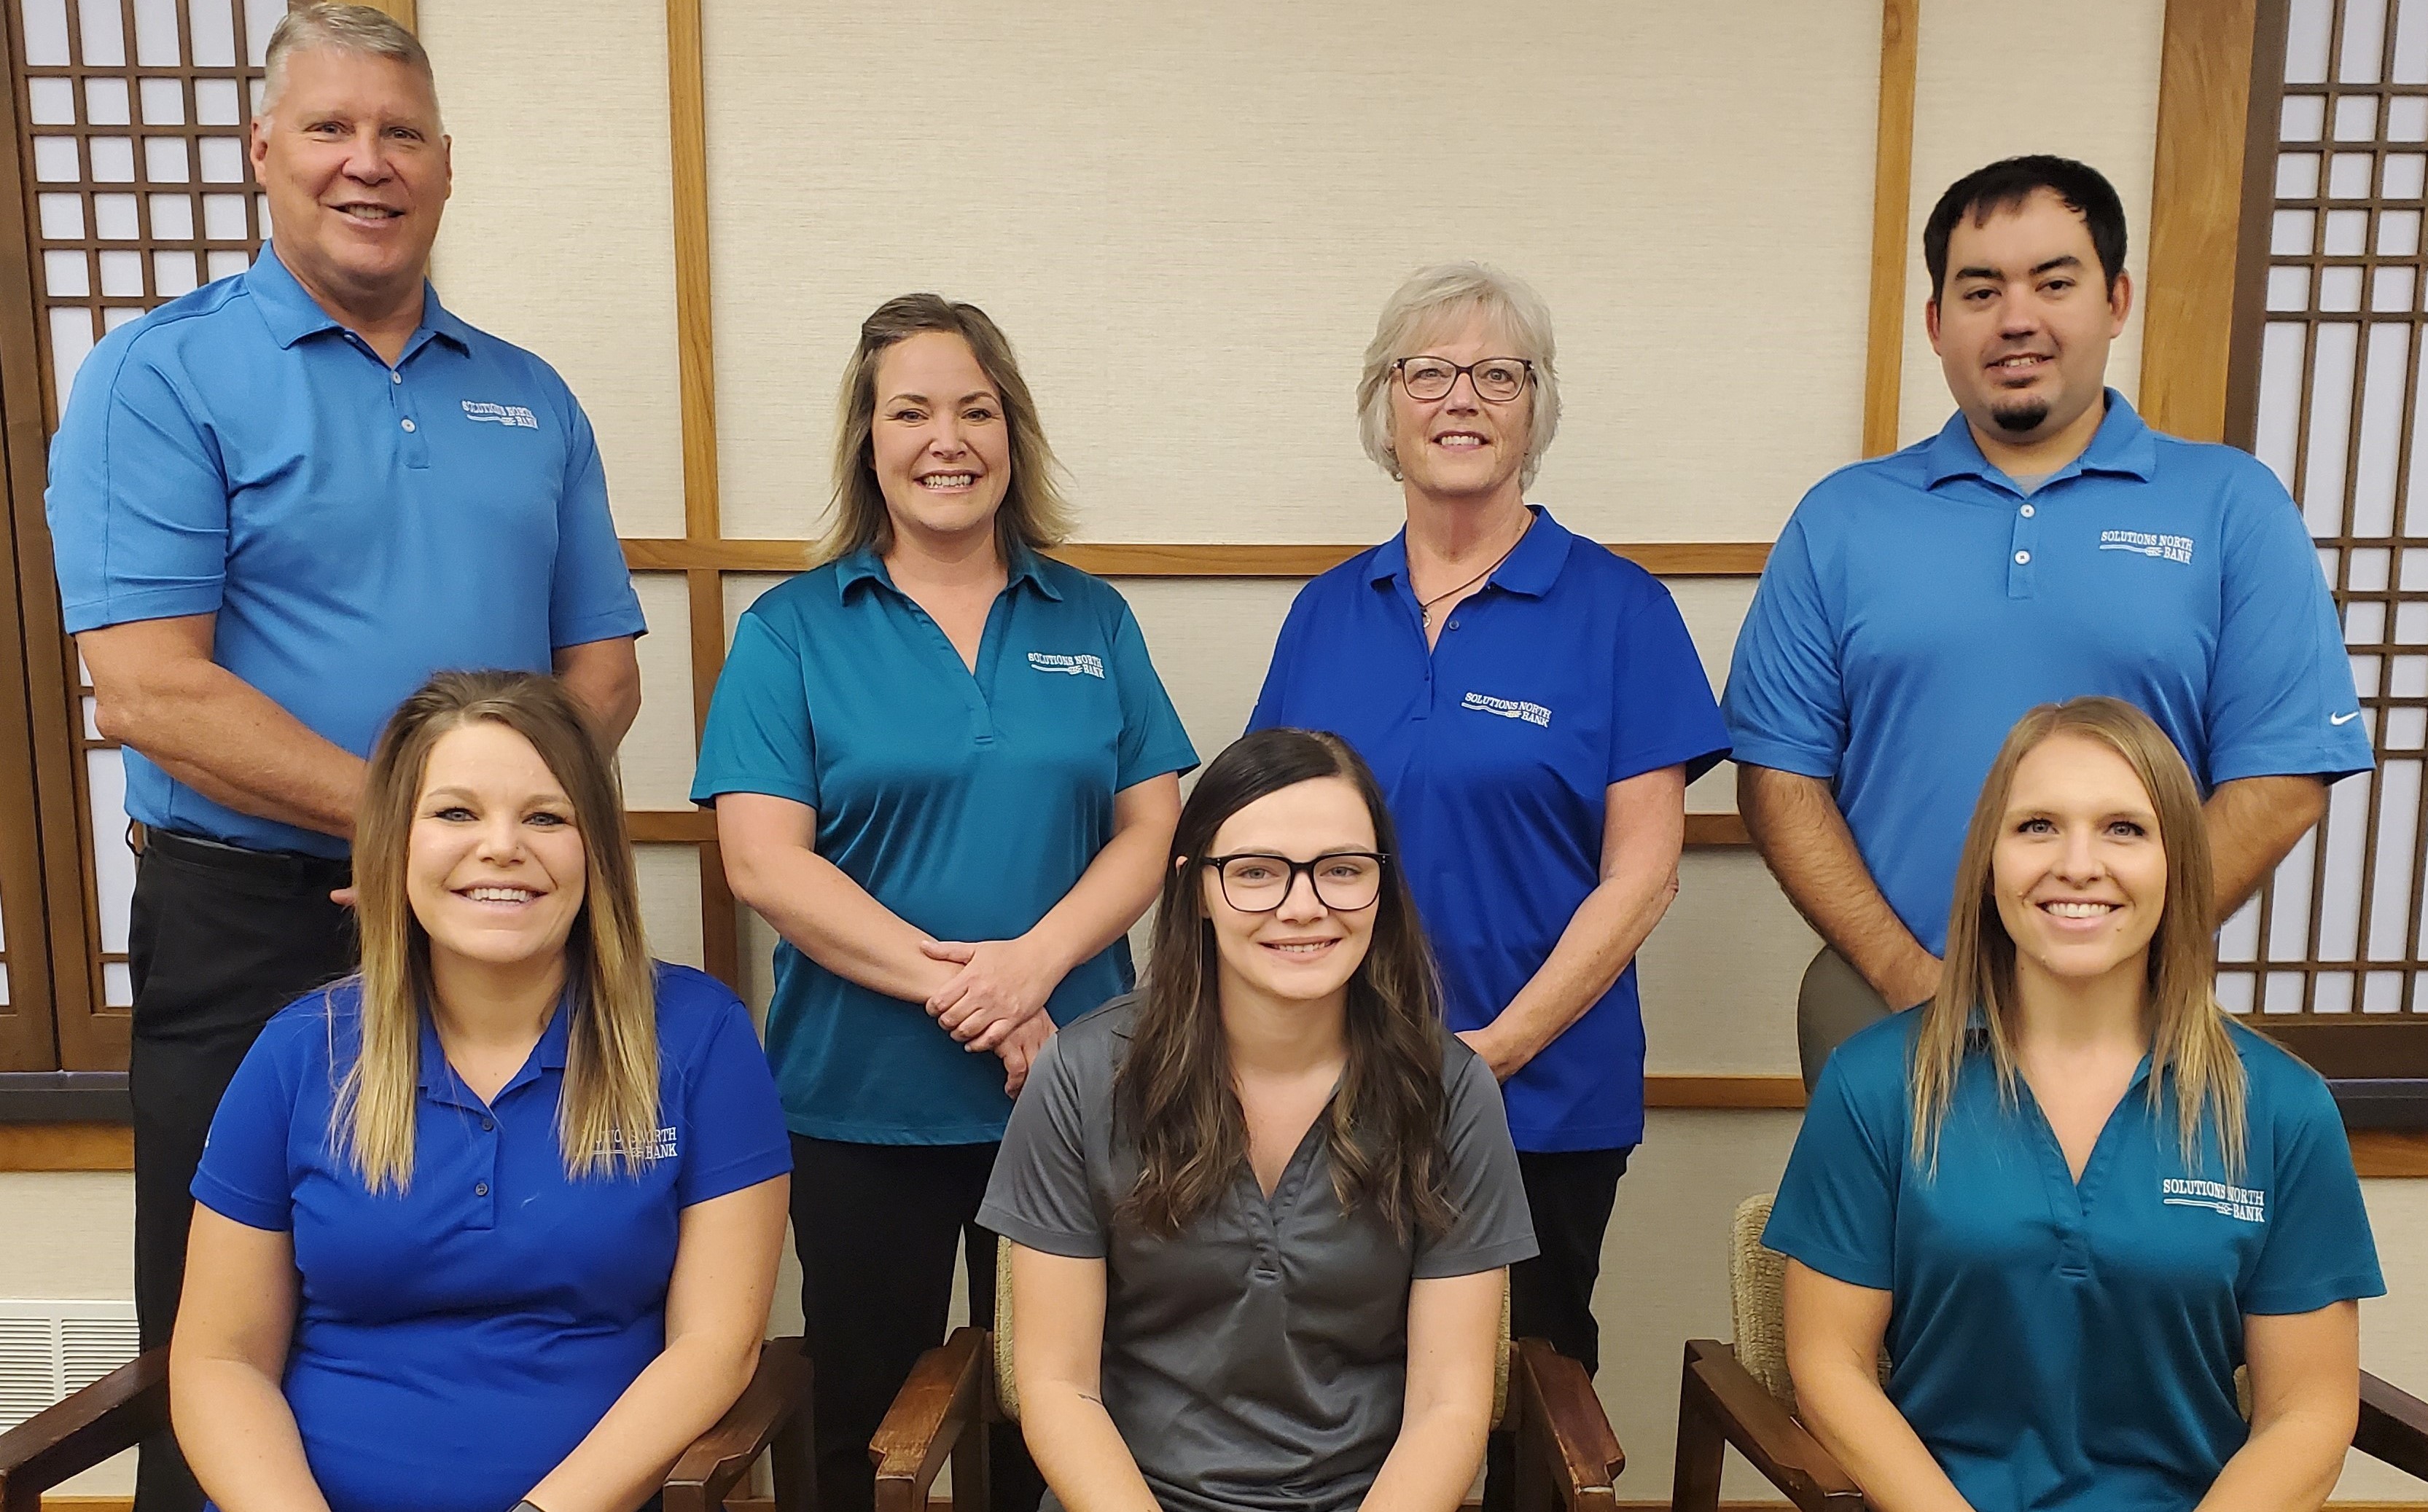 The staff at the Norton Branch is ready to serve you!